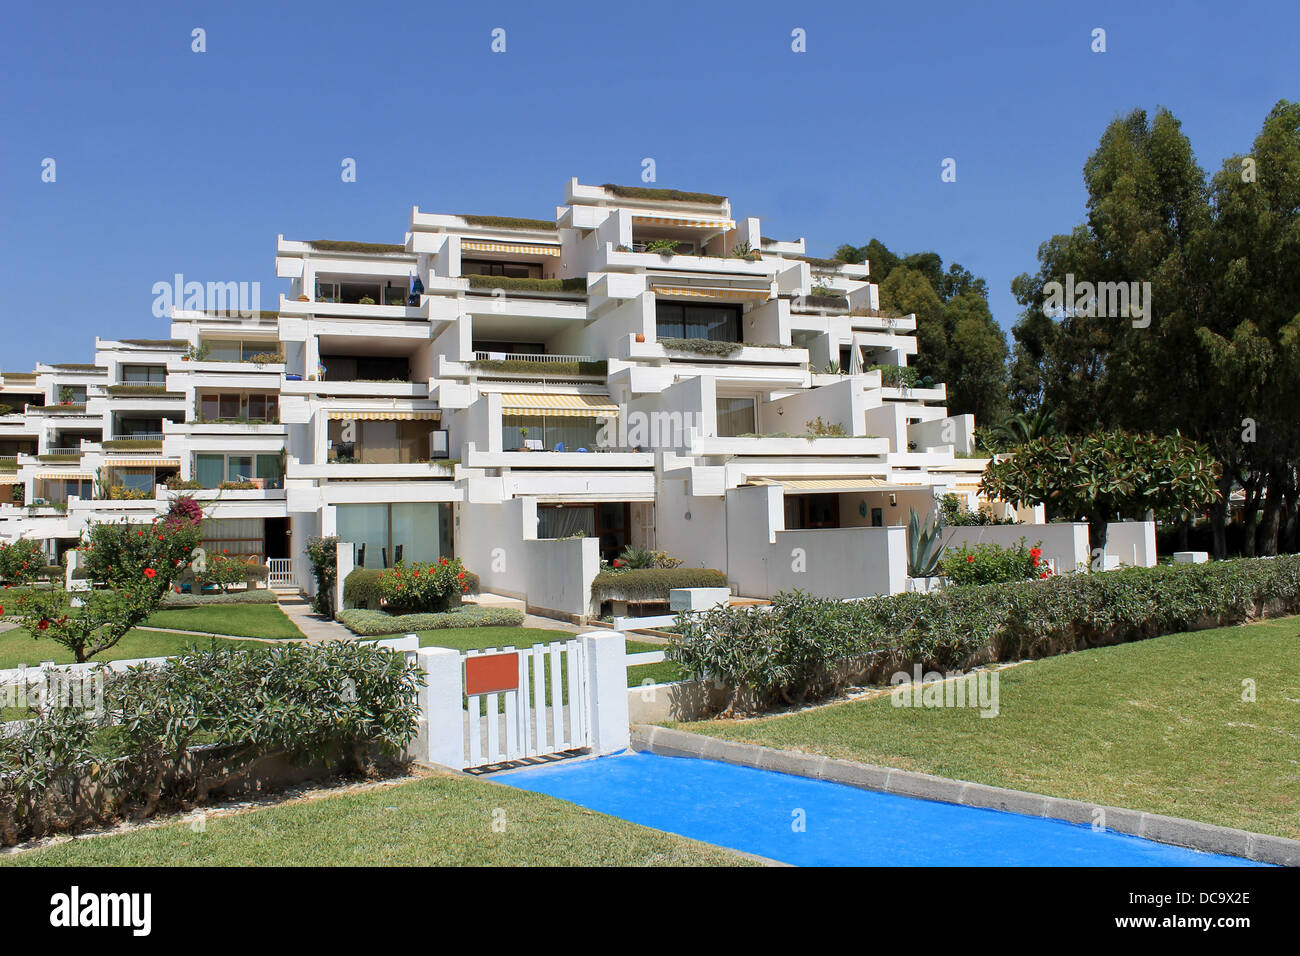 Spanish hotel apartment complex with blue sky background. Stock Photo